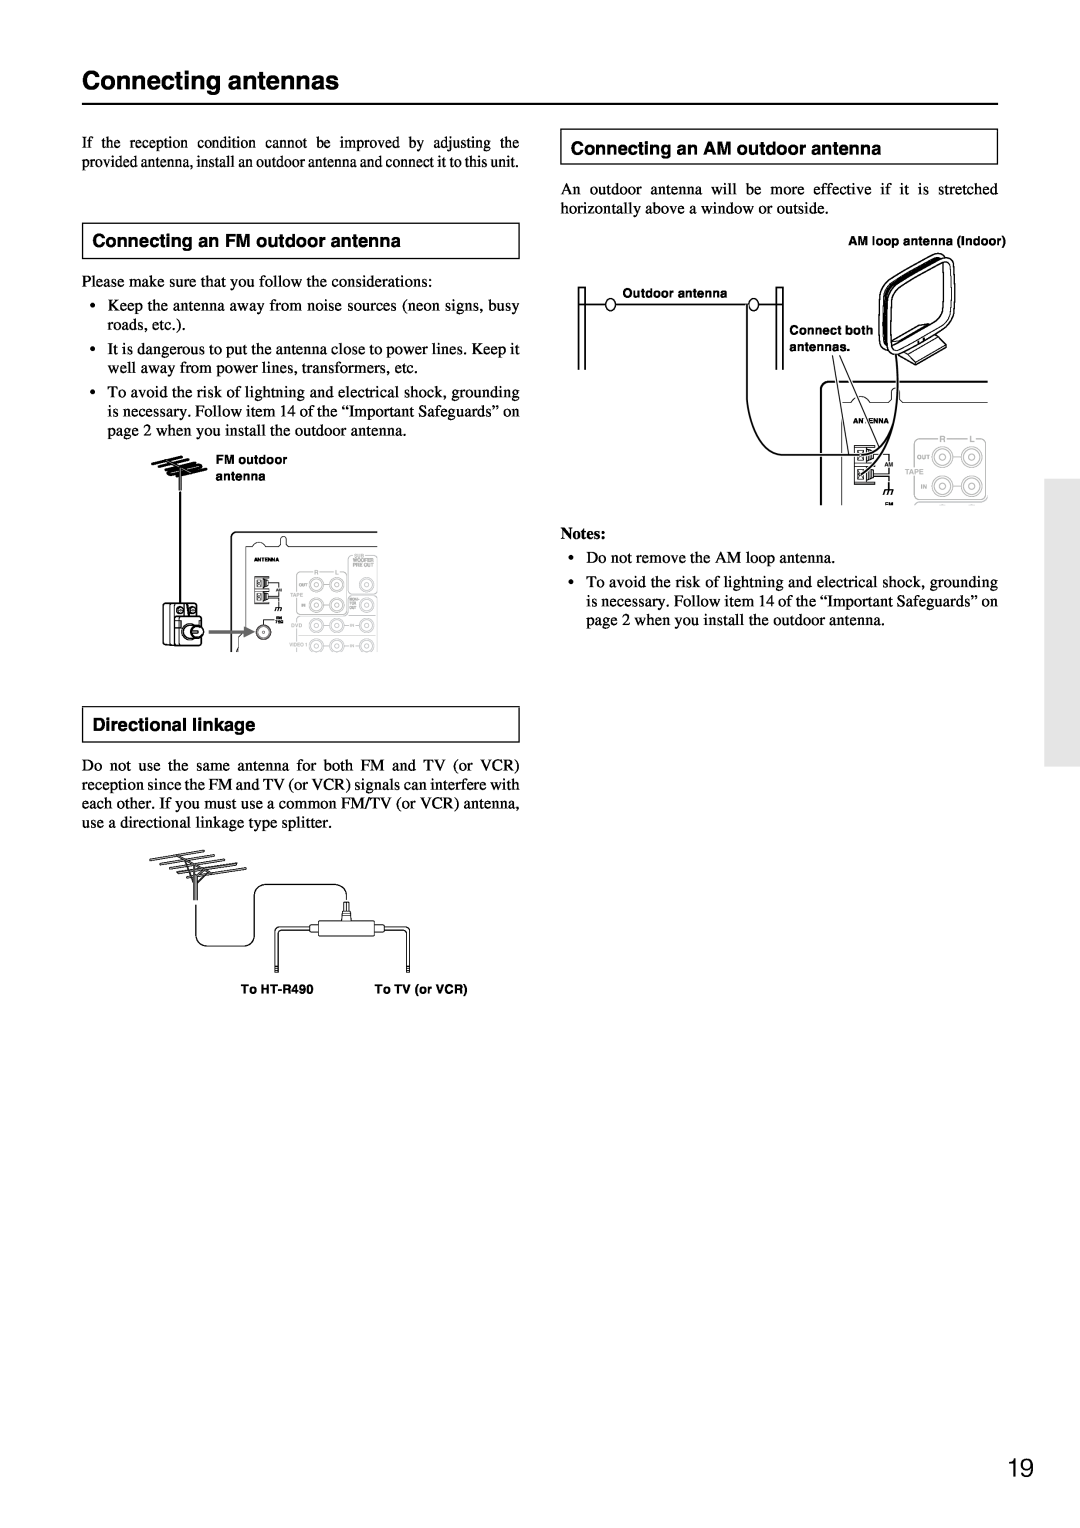 Onkyo HT-R490 Connecting antennas, Connecting an AM outdoor antenna, Connecting an FM outdoor antenna, Directional linkage 